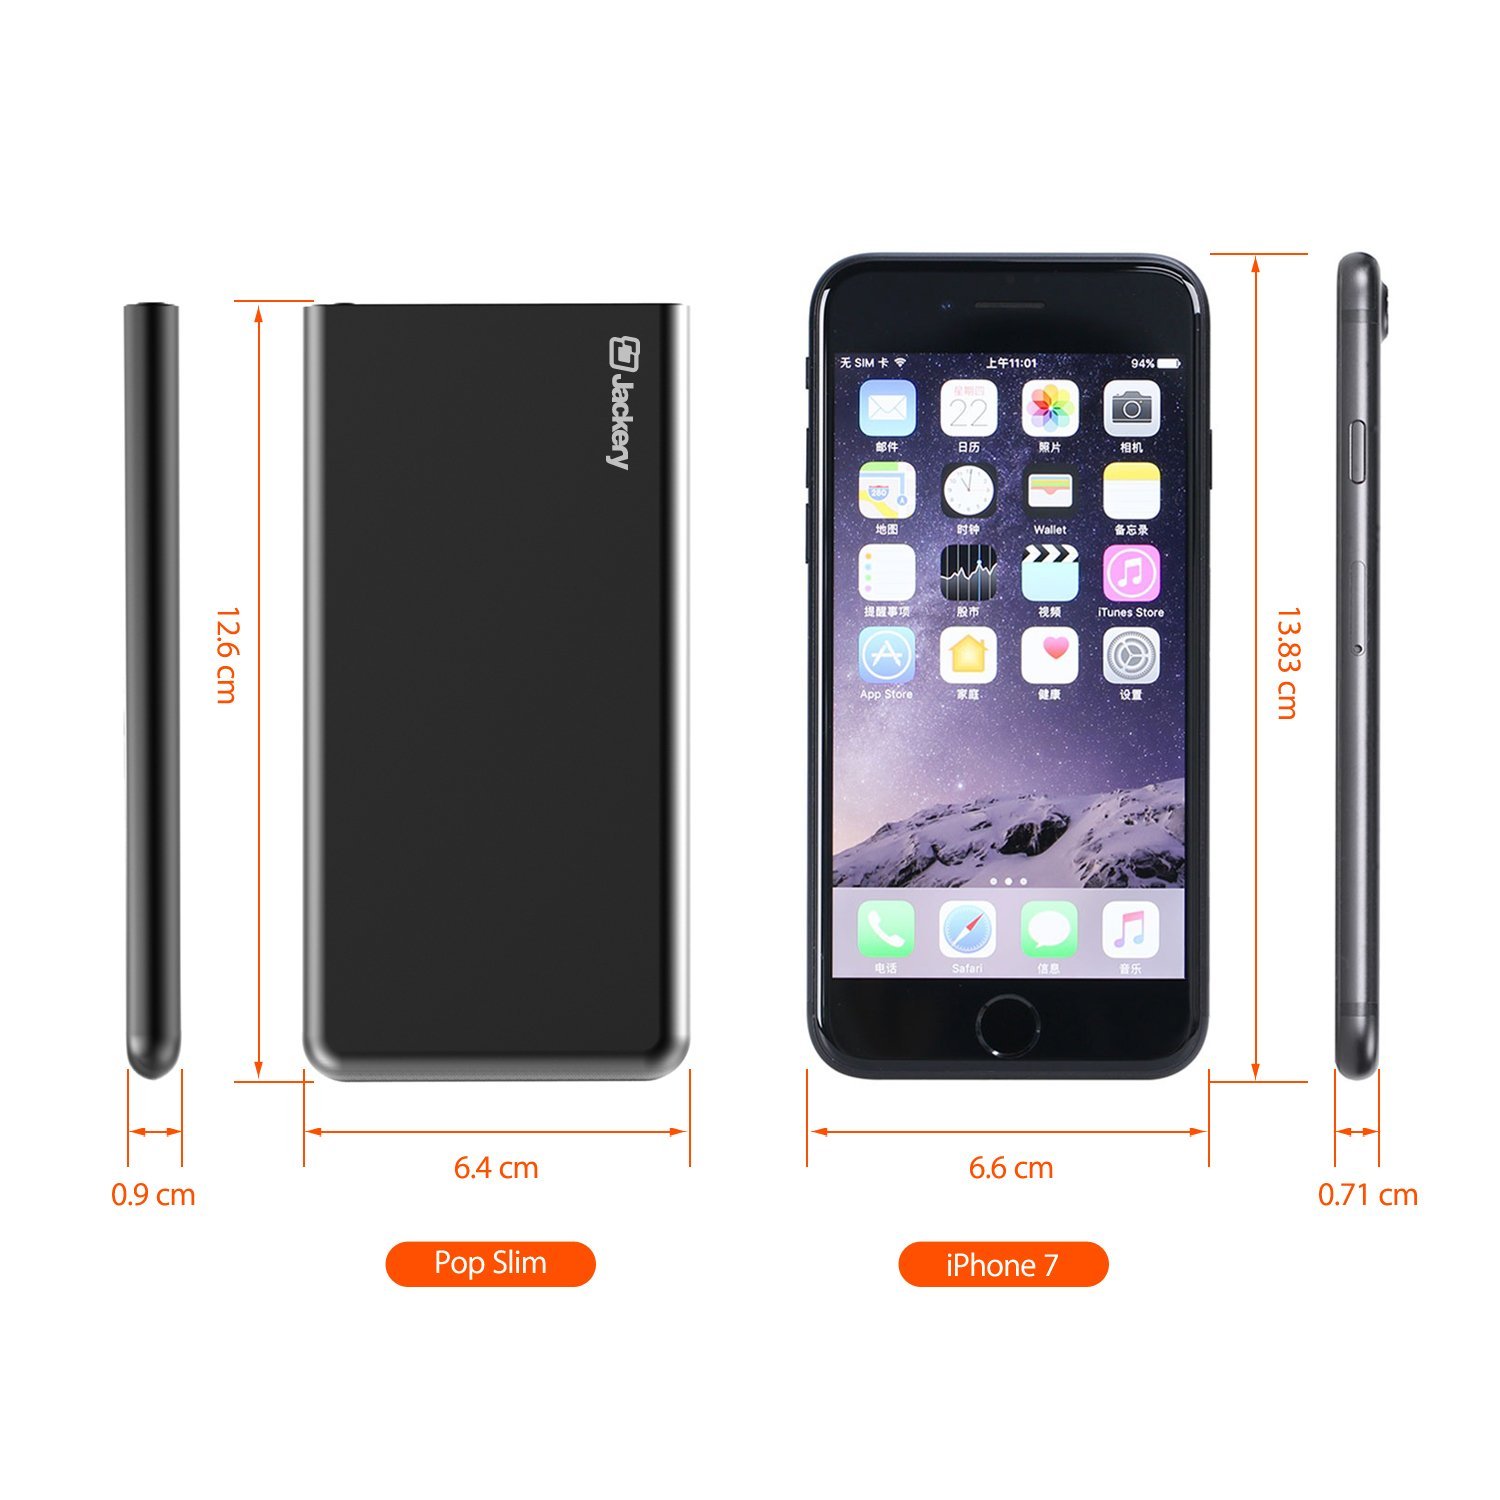 Eigenlijk opleggen Het strand As Slim as iPhone] Jackery Pop Slim 5000mAh External Battery Pack  Ultra-Slim lightweight Charger Portable Powerbank with Aluminum Shell For  iPhone 6 iPhone 6s iPhone 7/7 Plus - CHARGE WITH POWER